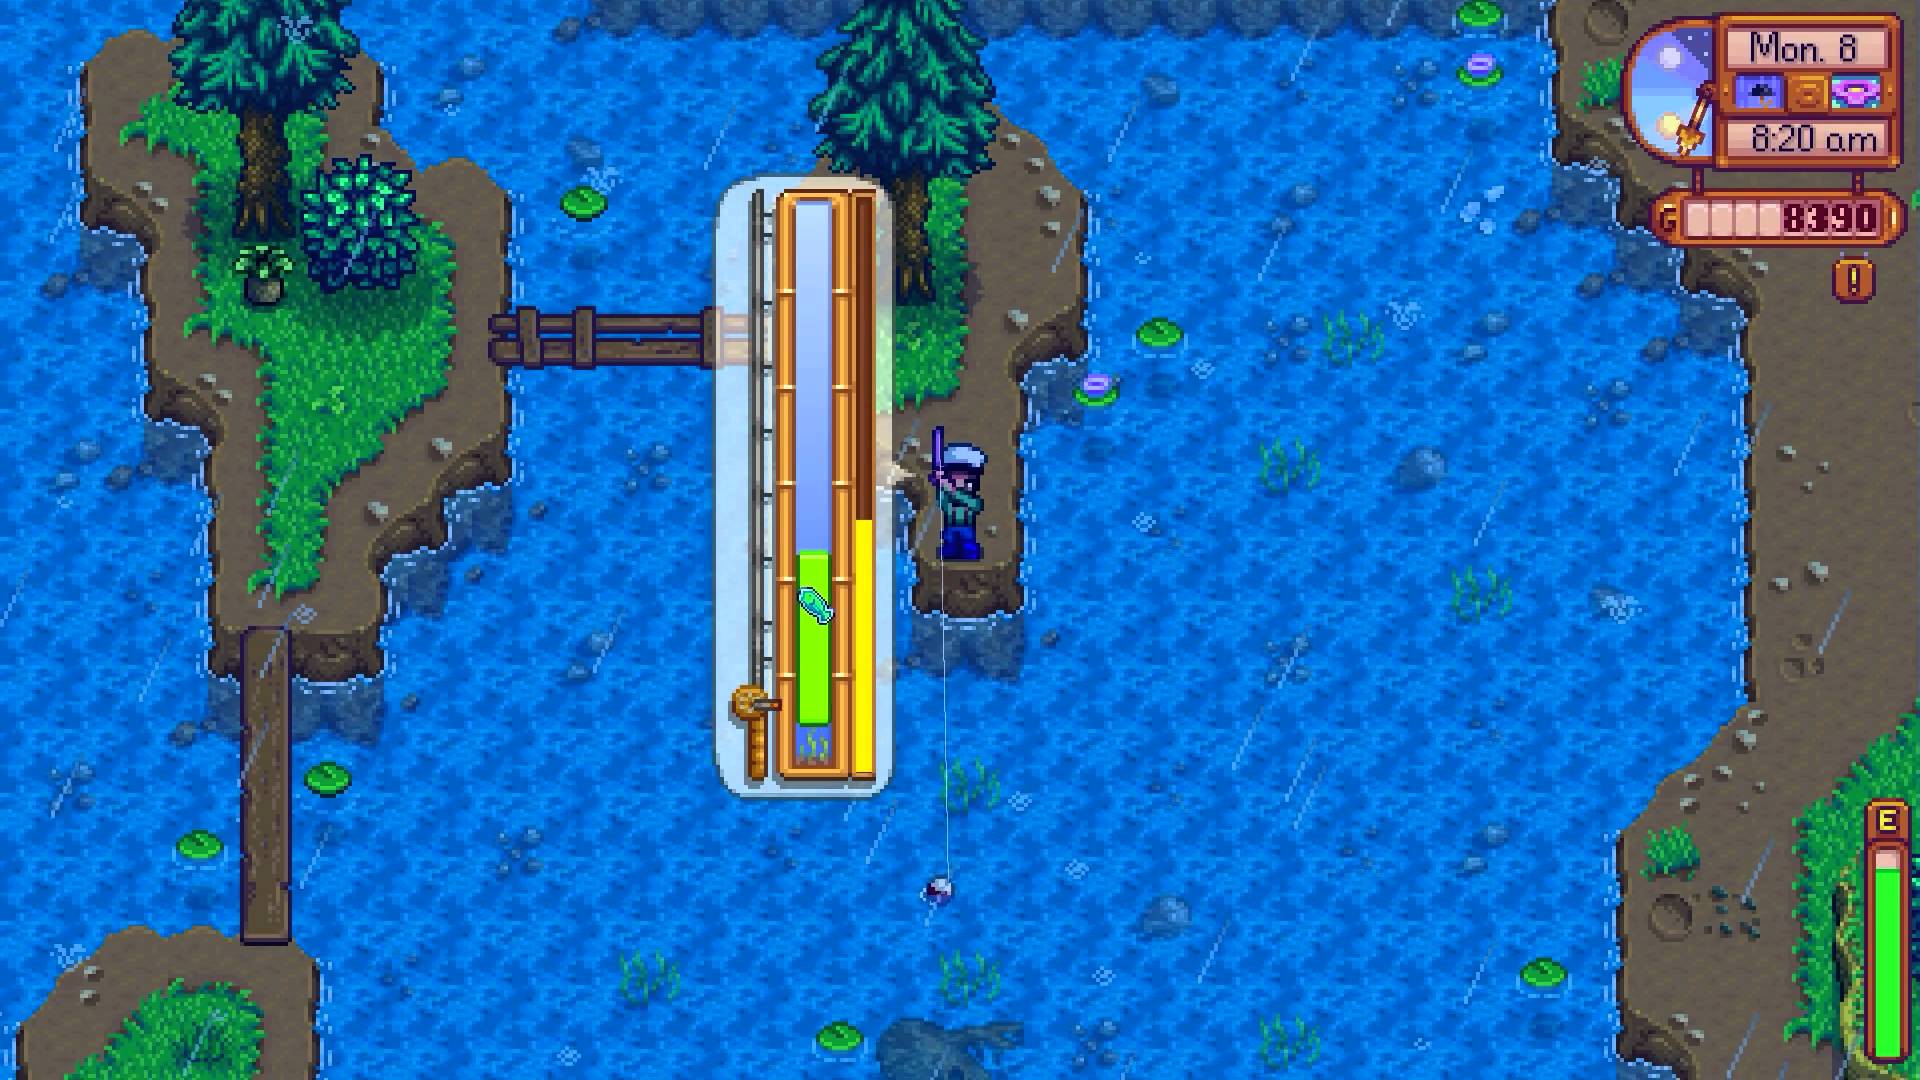 A Beginner's Guide to Fishing in Stardew Valley